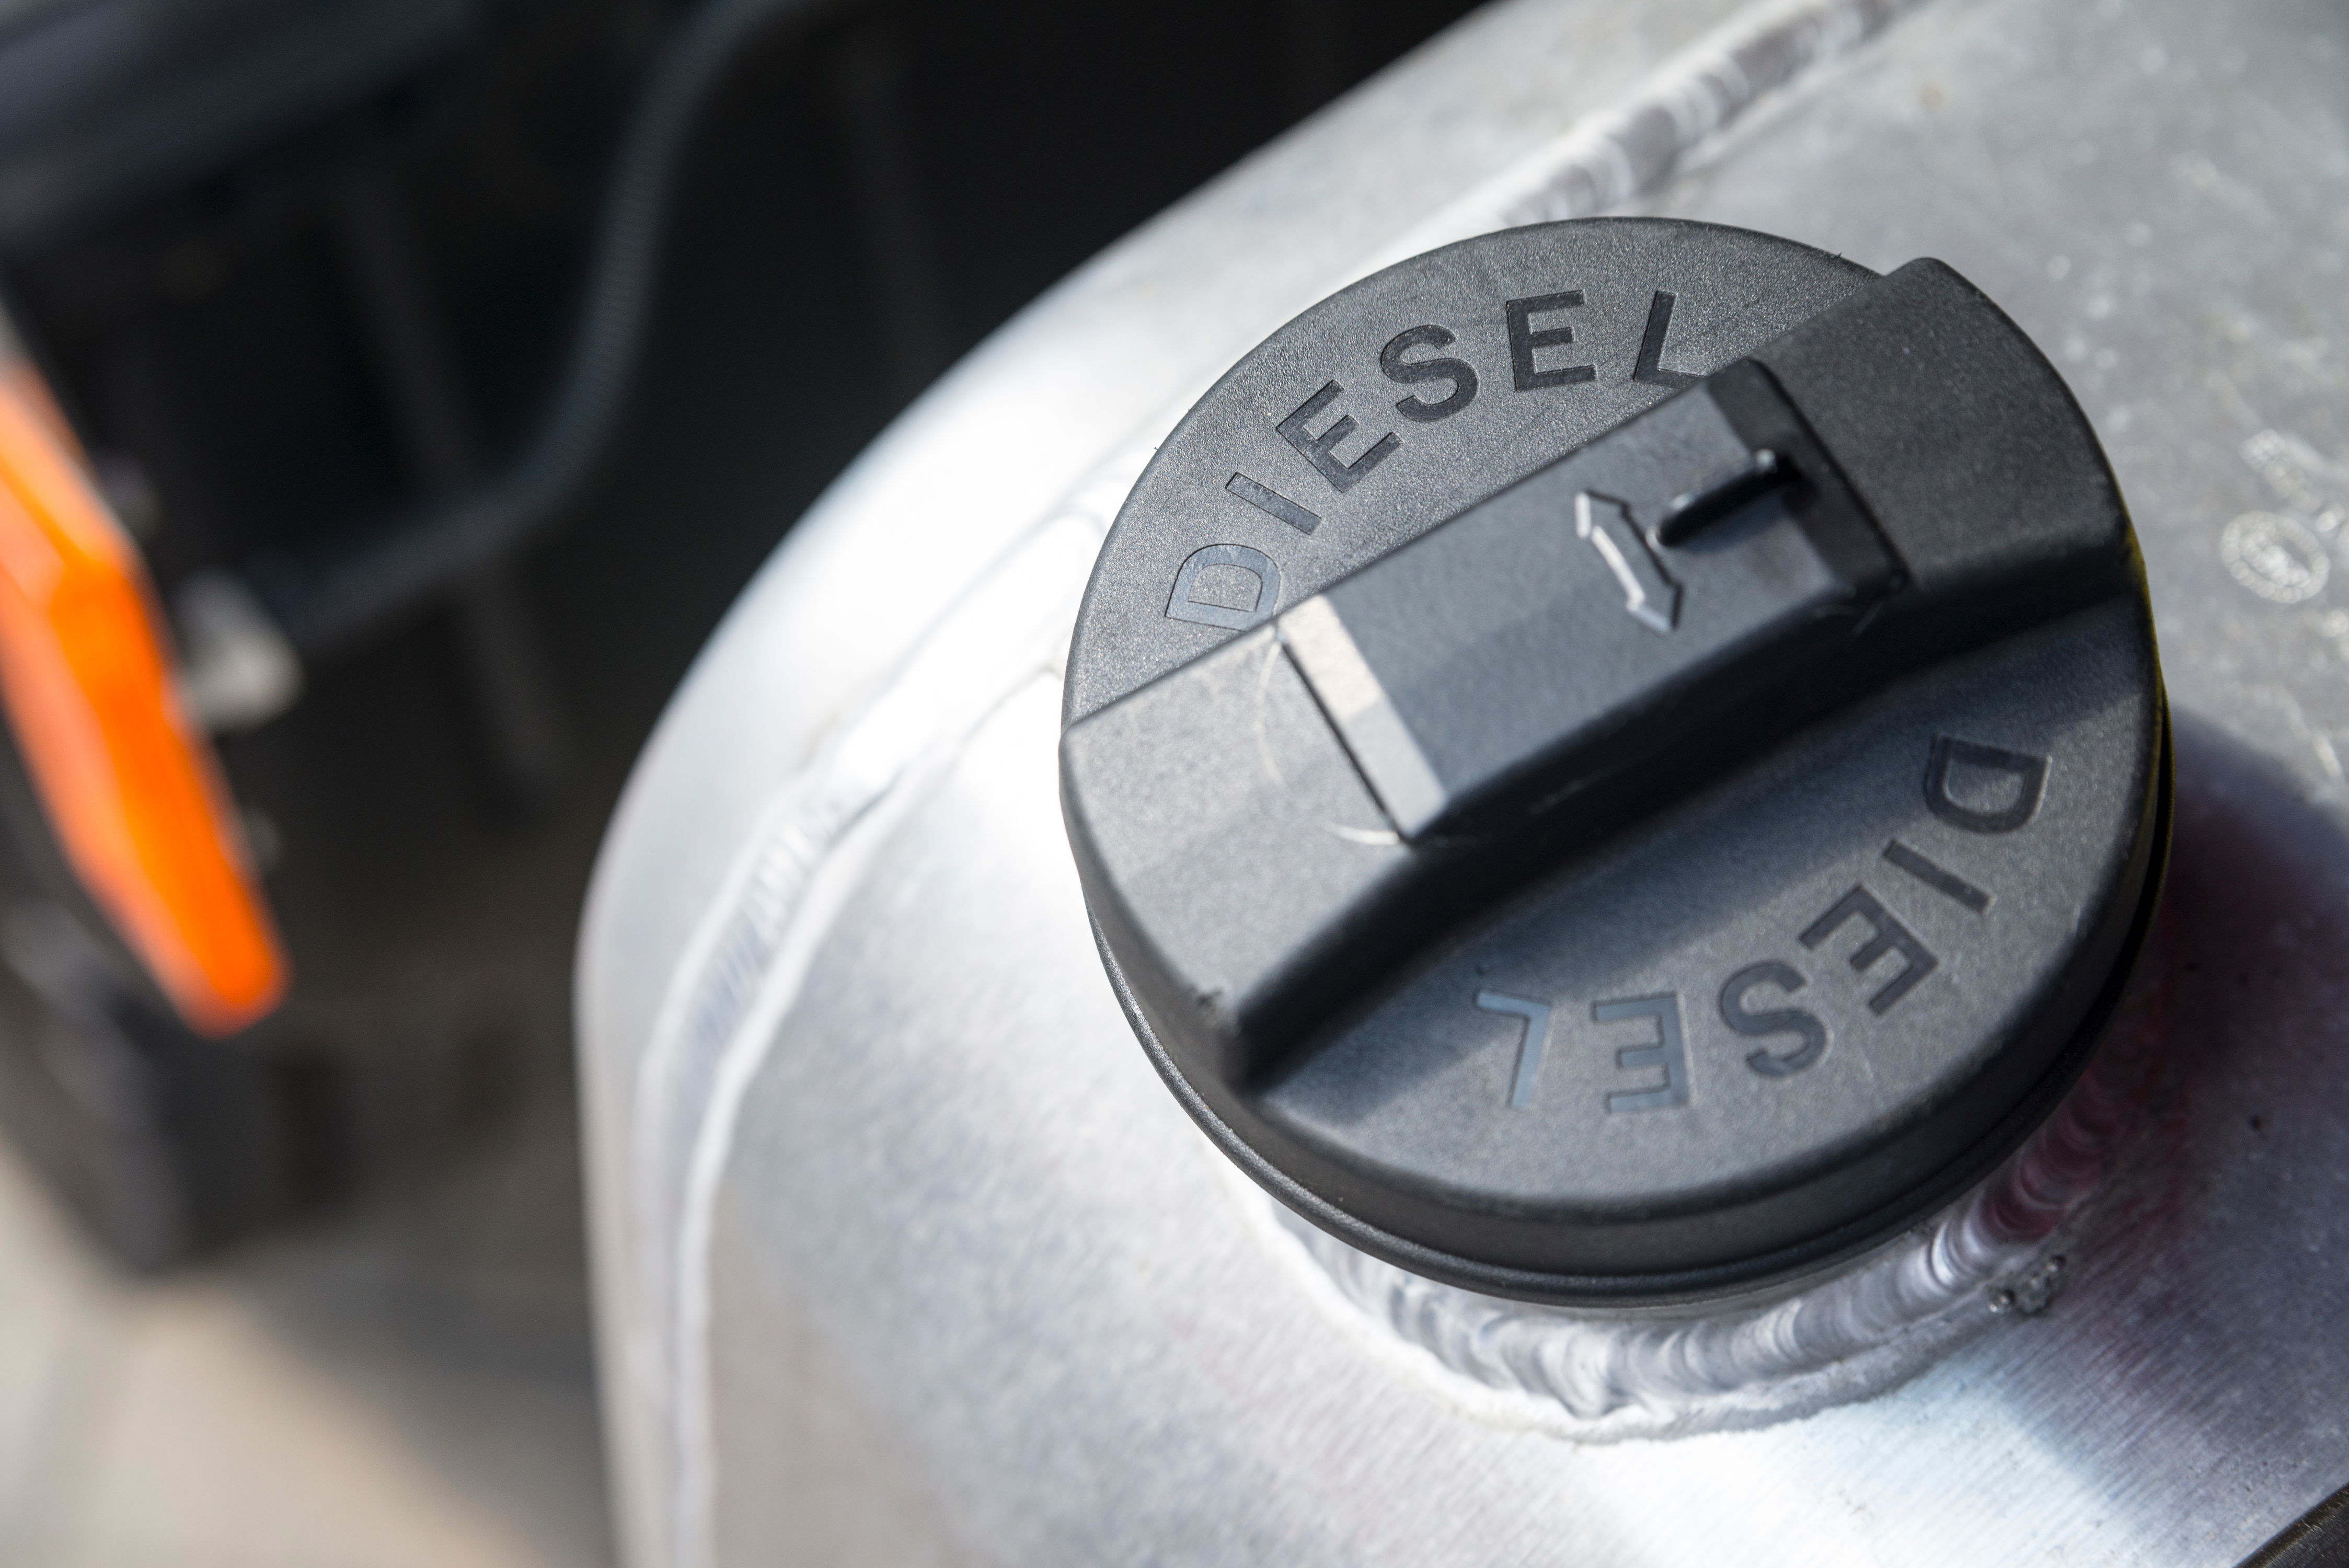 Where Are Diesel Prices Going?